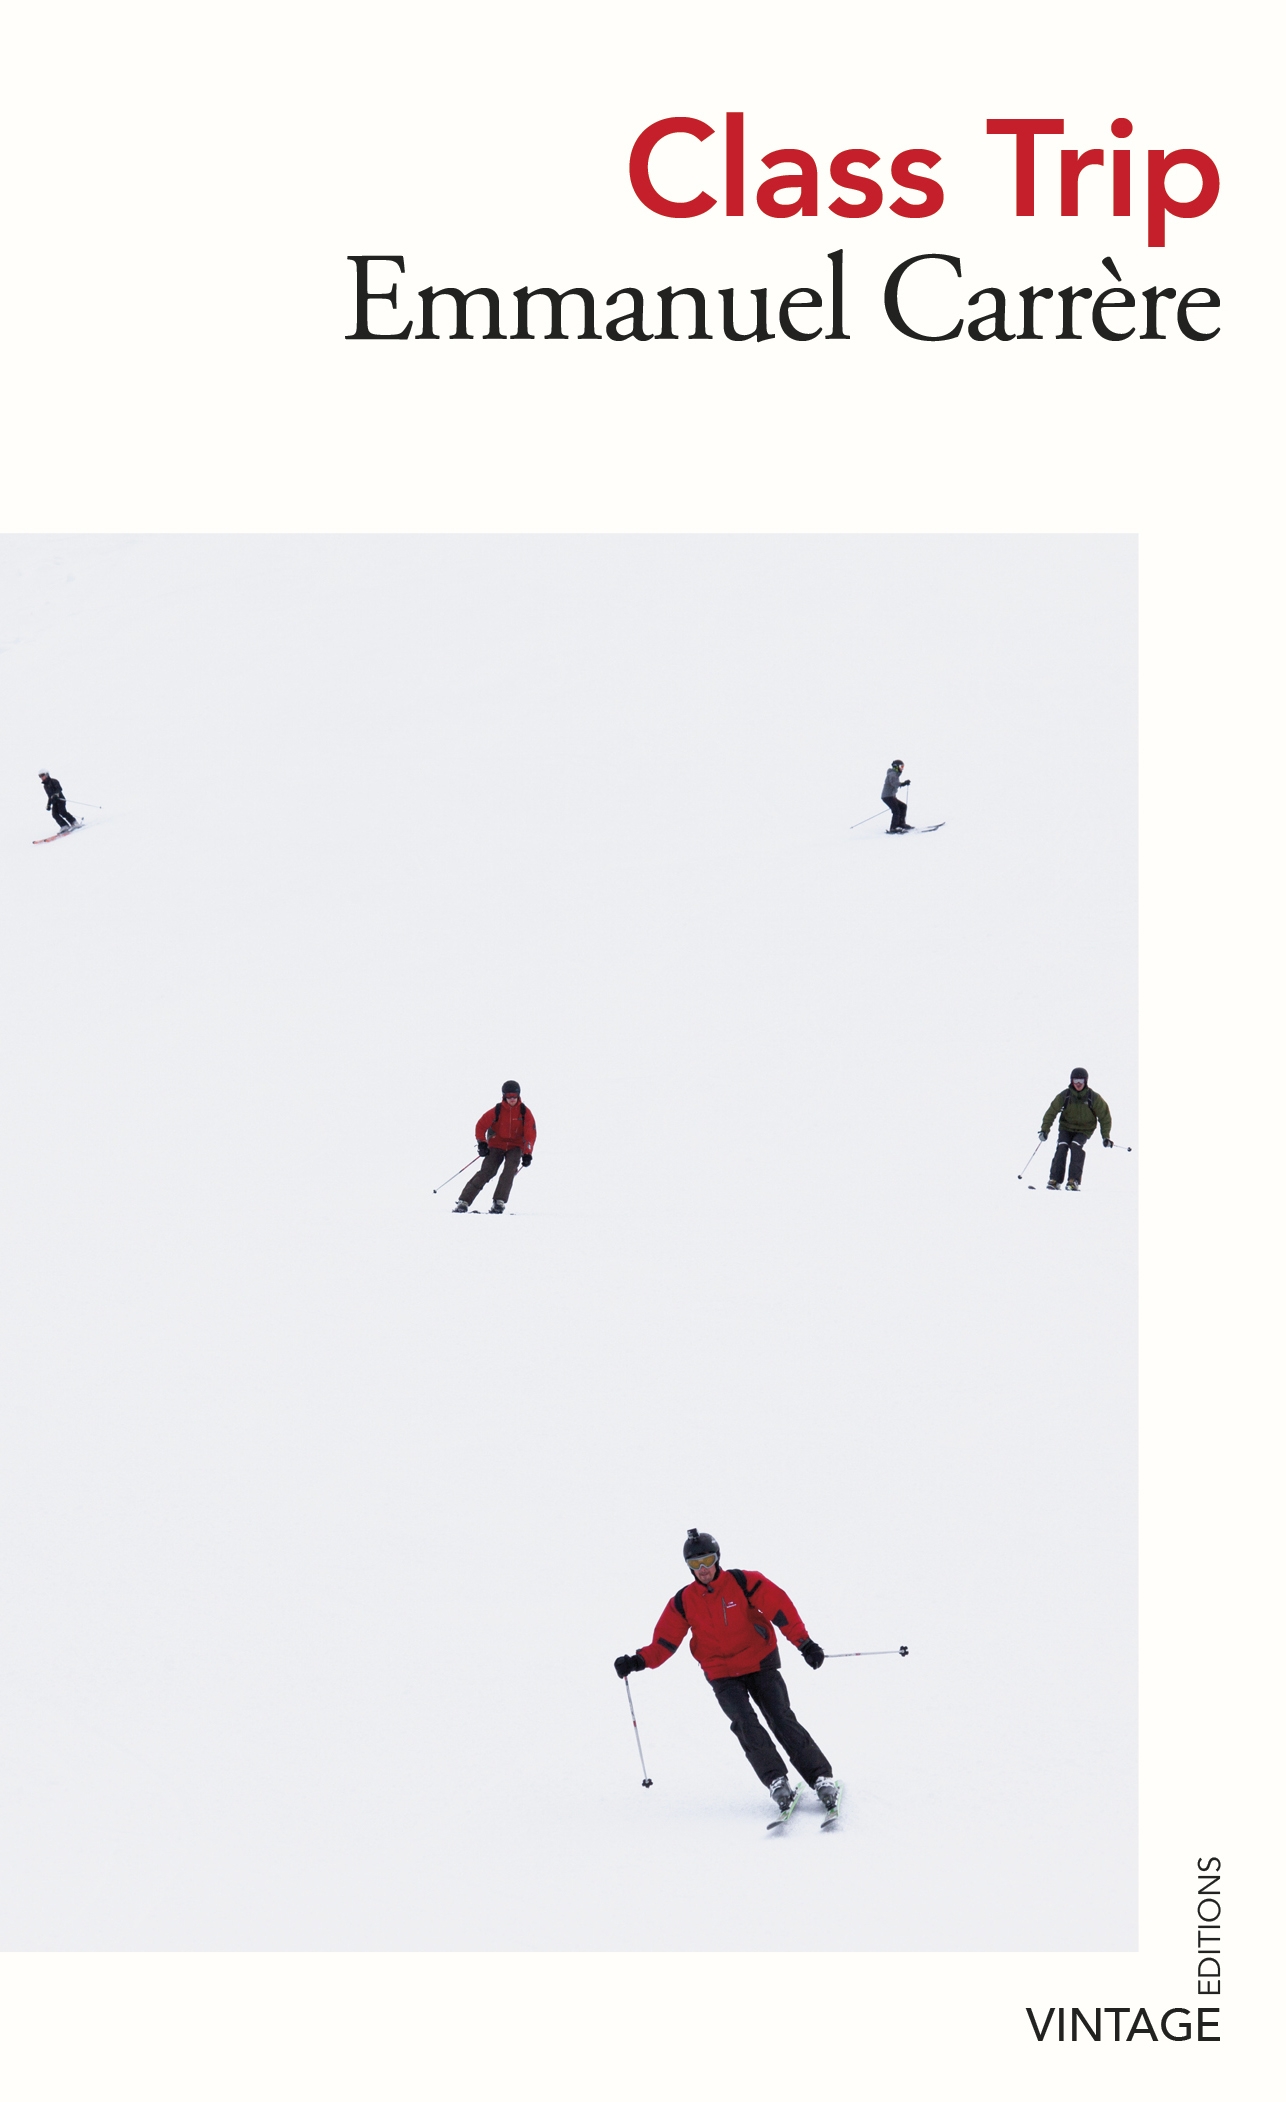 The cover of the book Class Trip, featuring small figures of skiers on a stark white background,